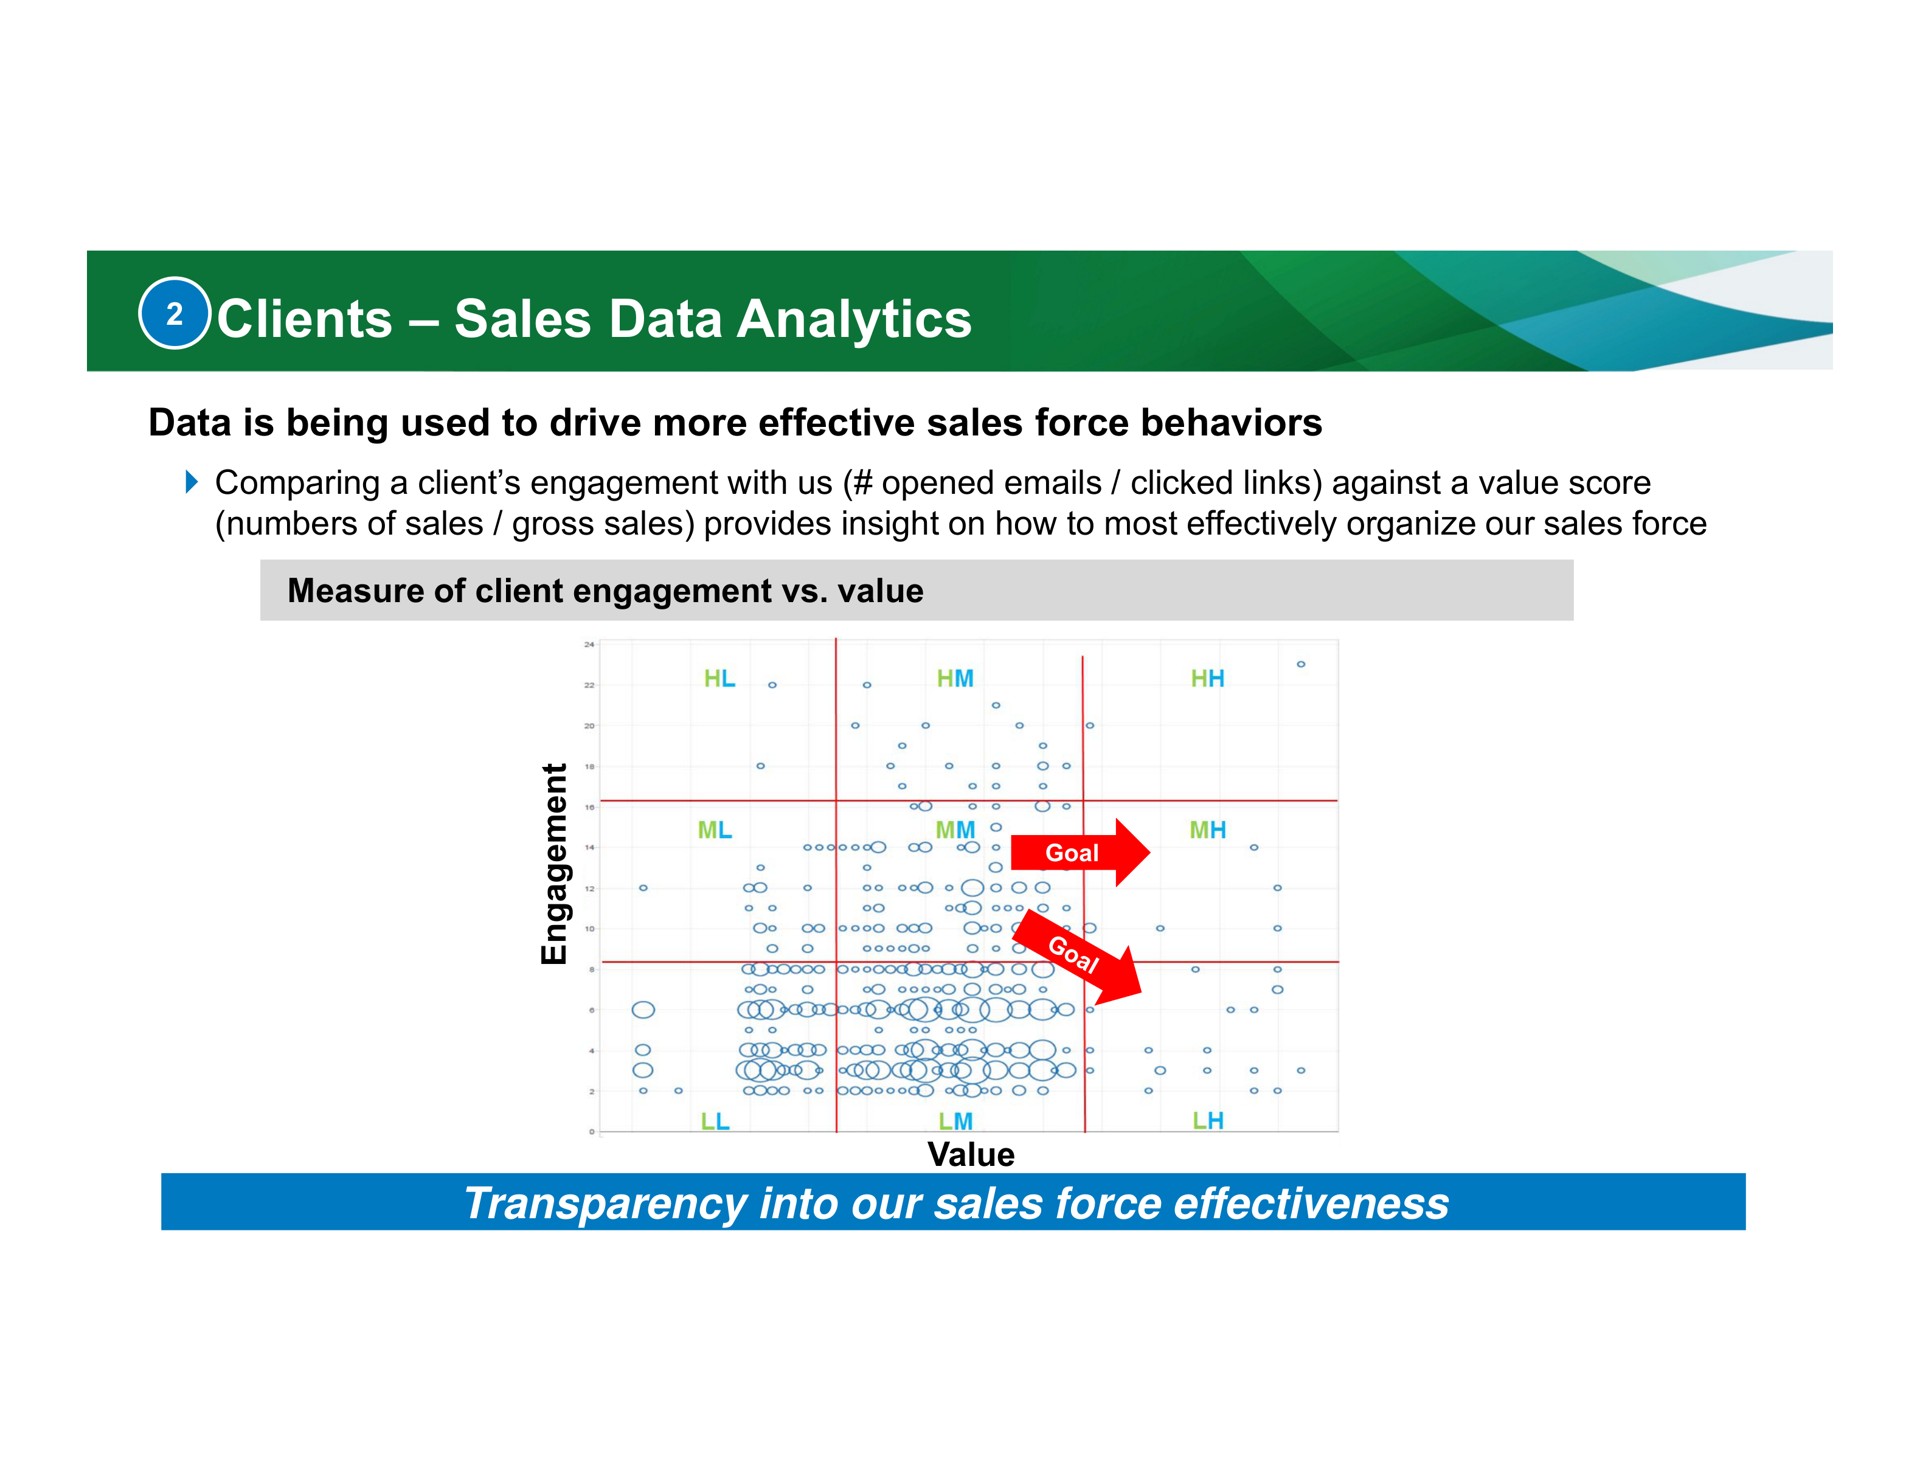 clients sales data analytics transparency into our sales force effectiveness | BlackRock